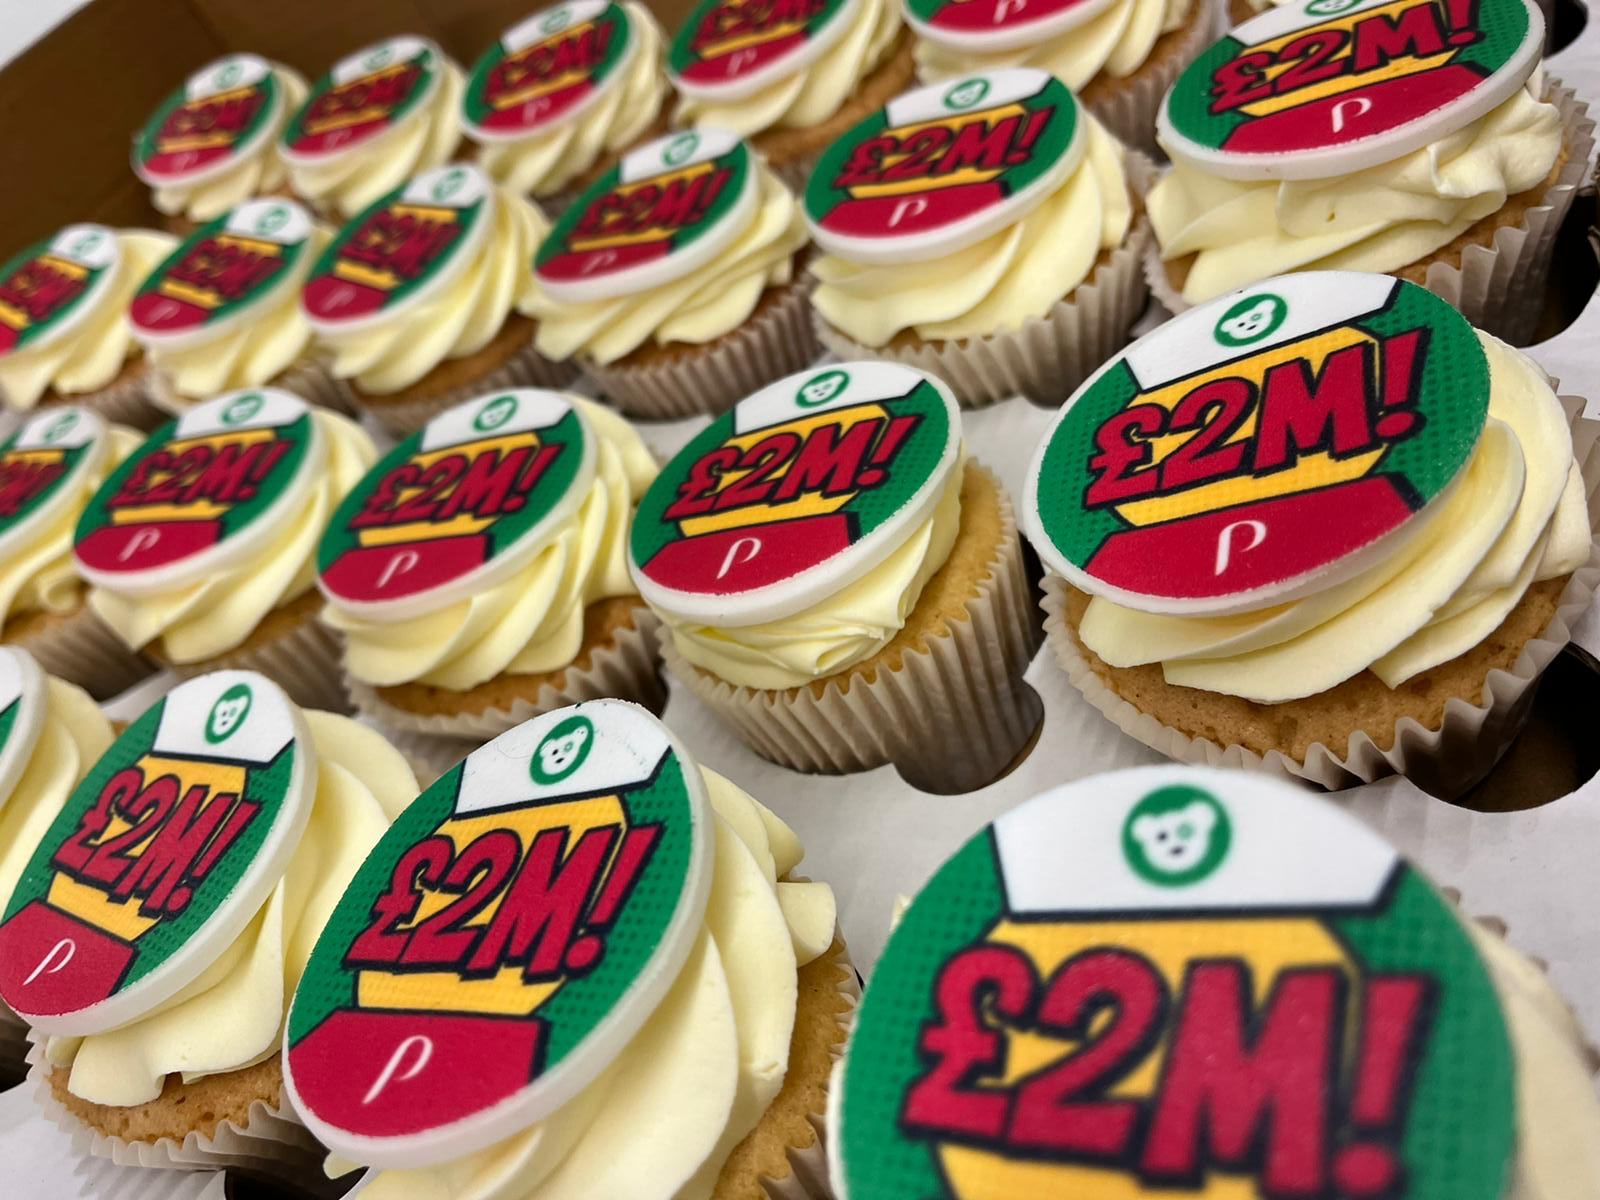 Cupcakes at the Peninsula Group £2million pledge announcement